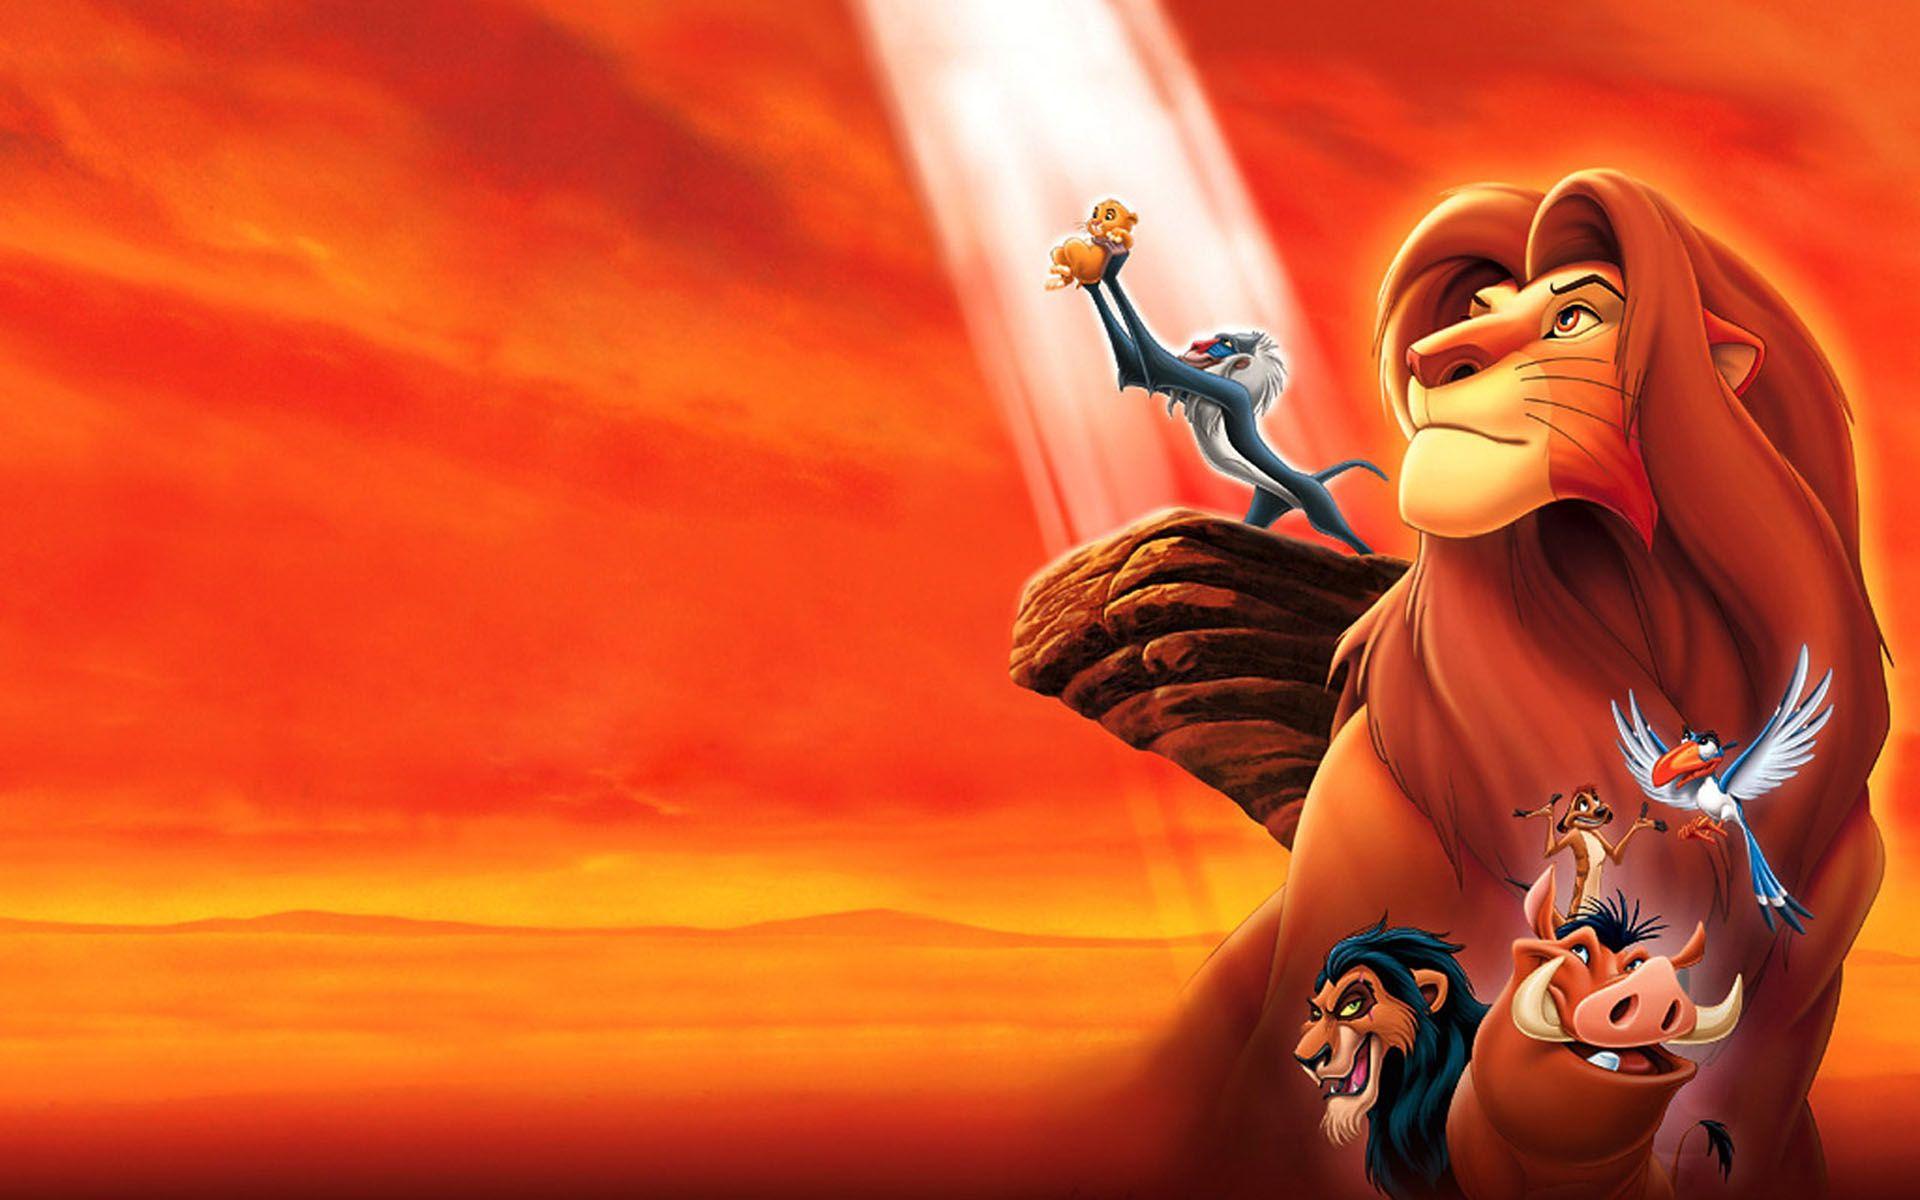 The Lion King HD Wallpaper for iPhone 6